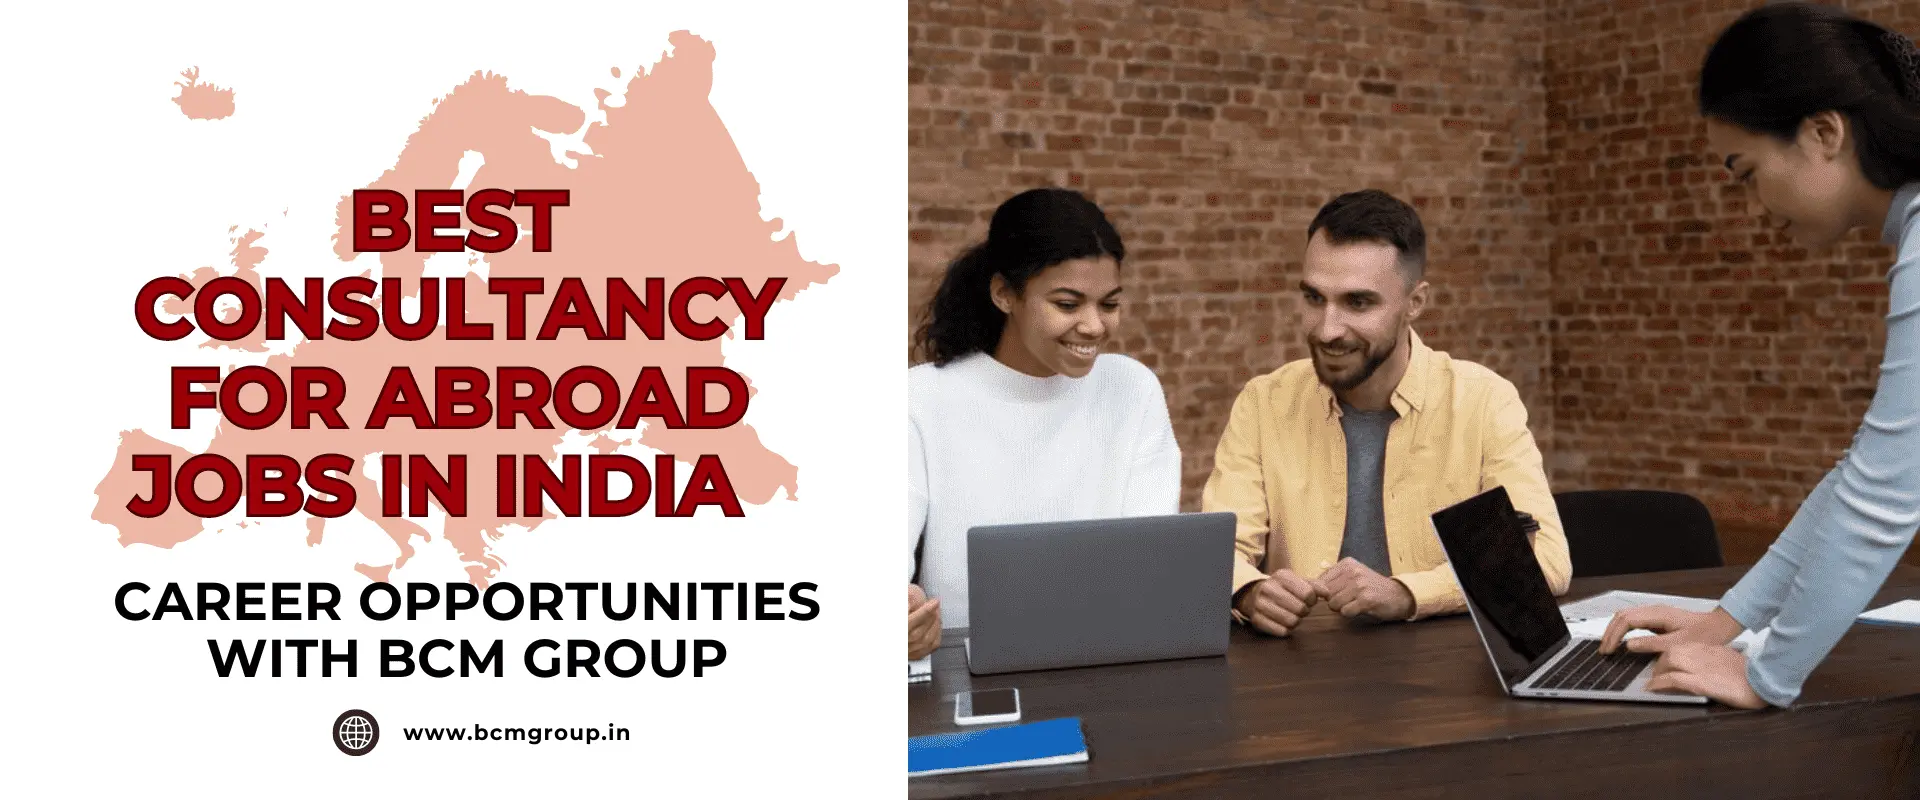 BEST CONSULTANCY FOR ABROAD JOBS IN INDIA  